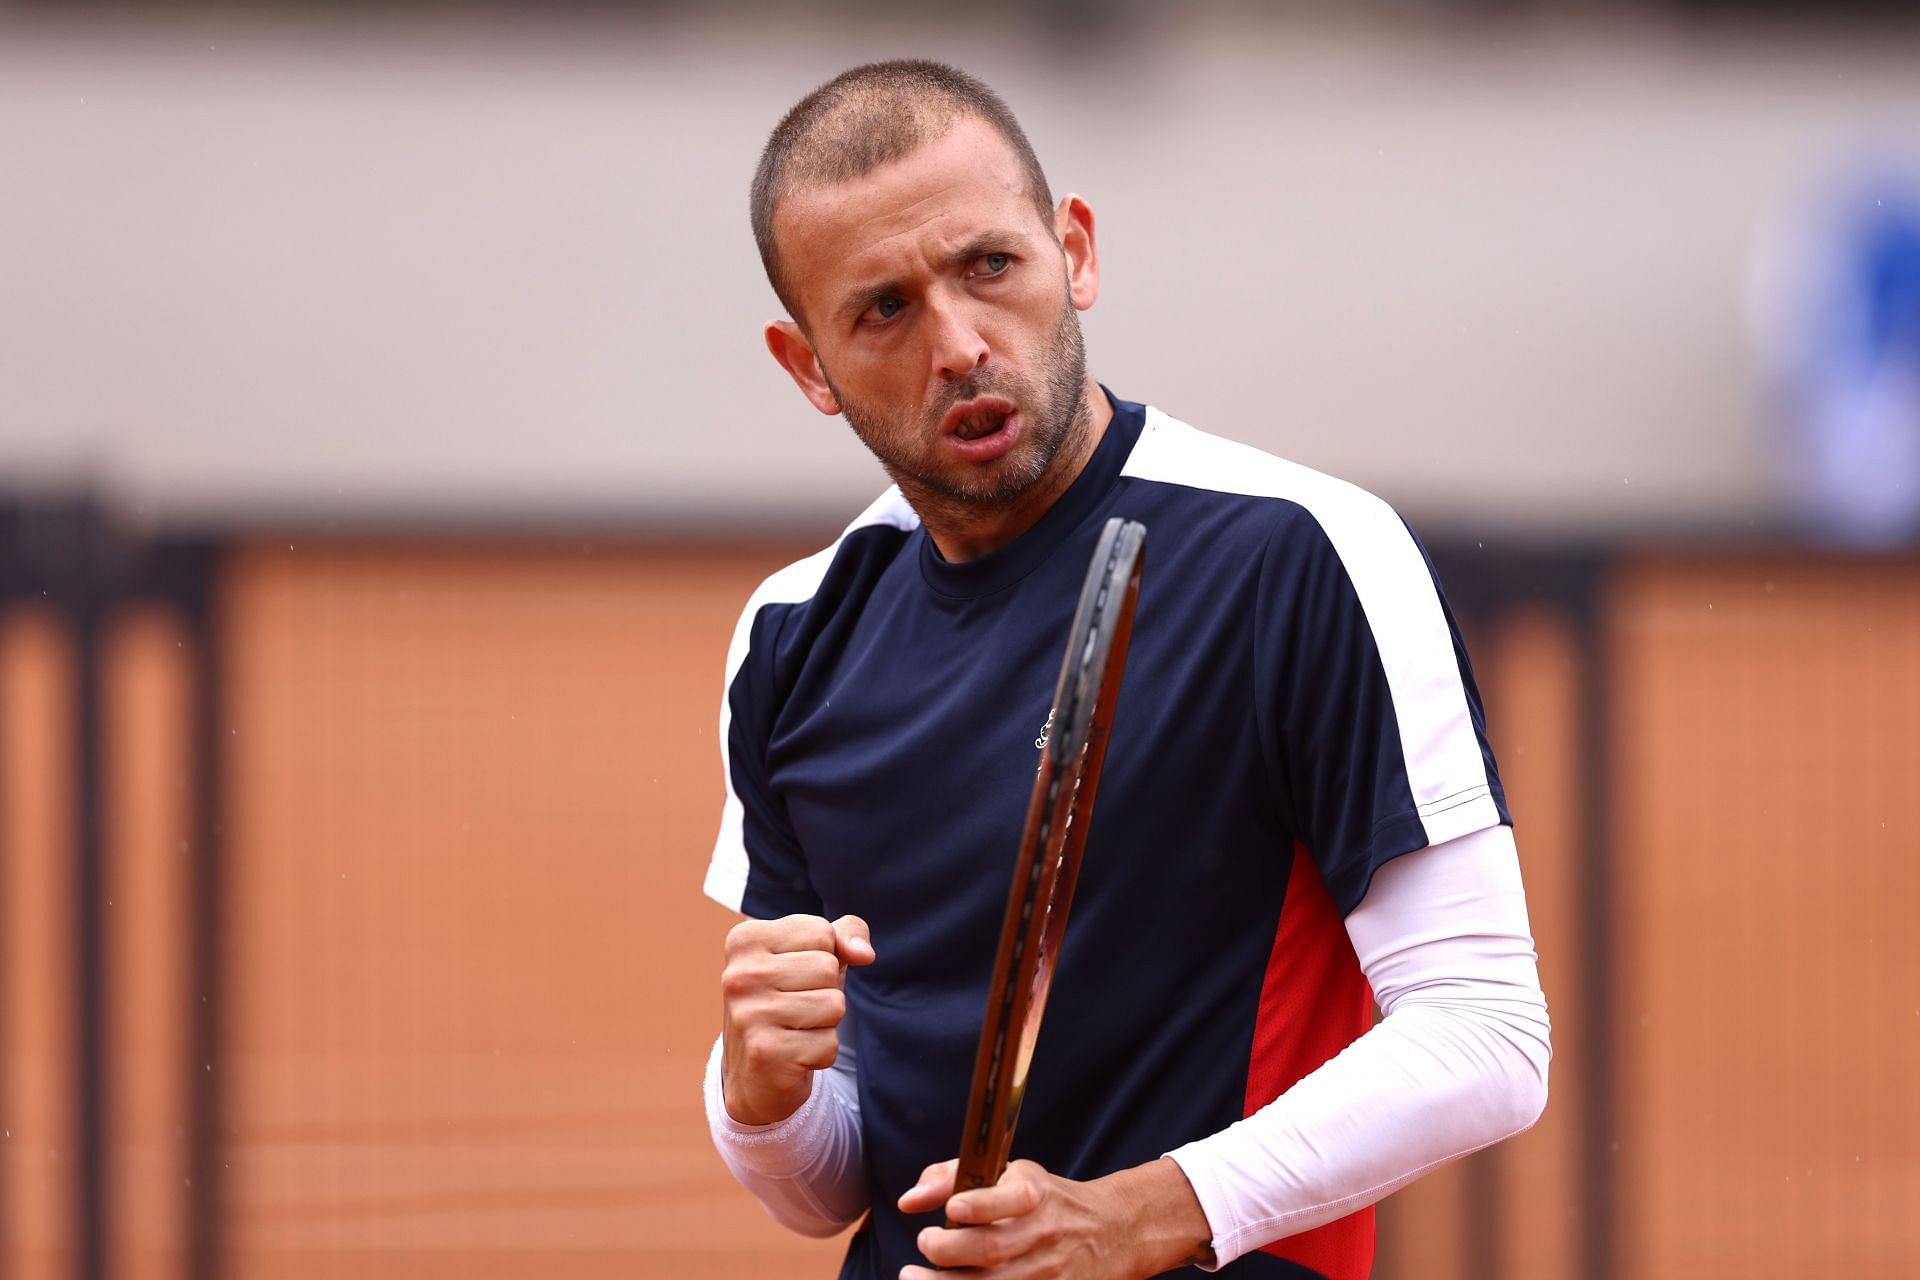 Evans opens his Roland Garros campaign on Sunday.